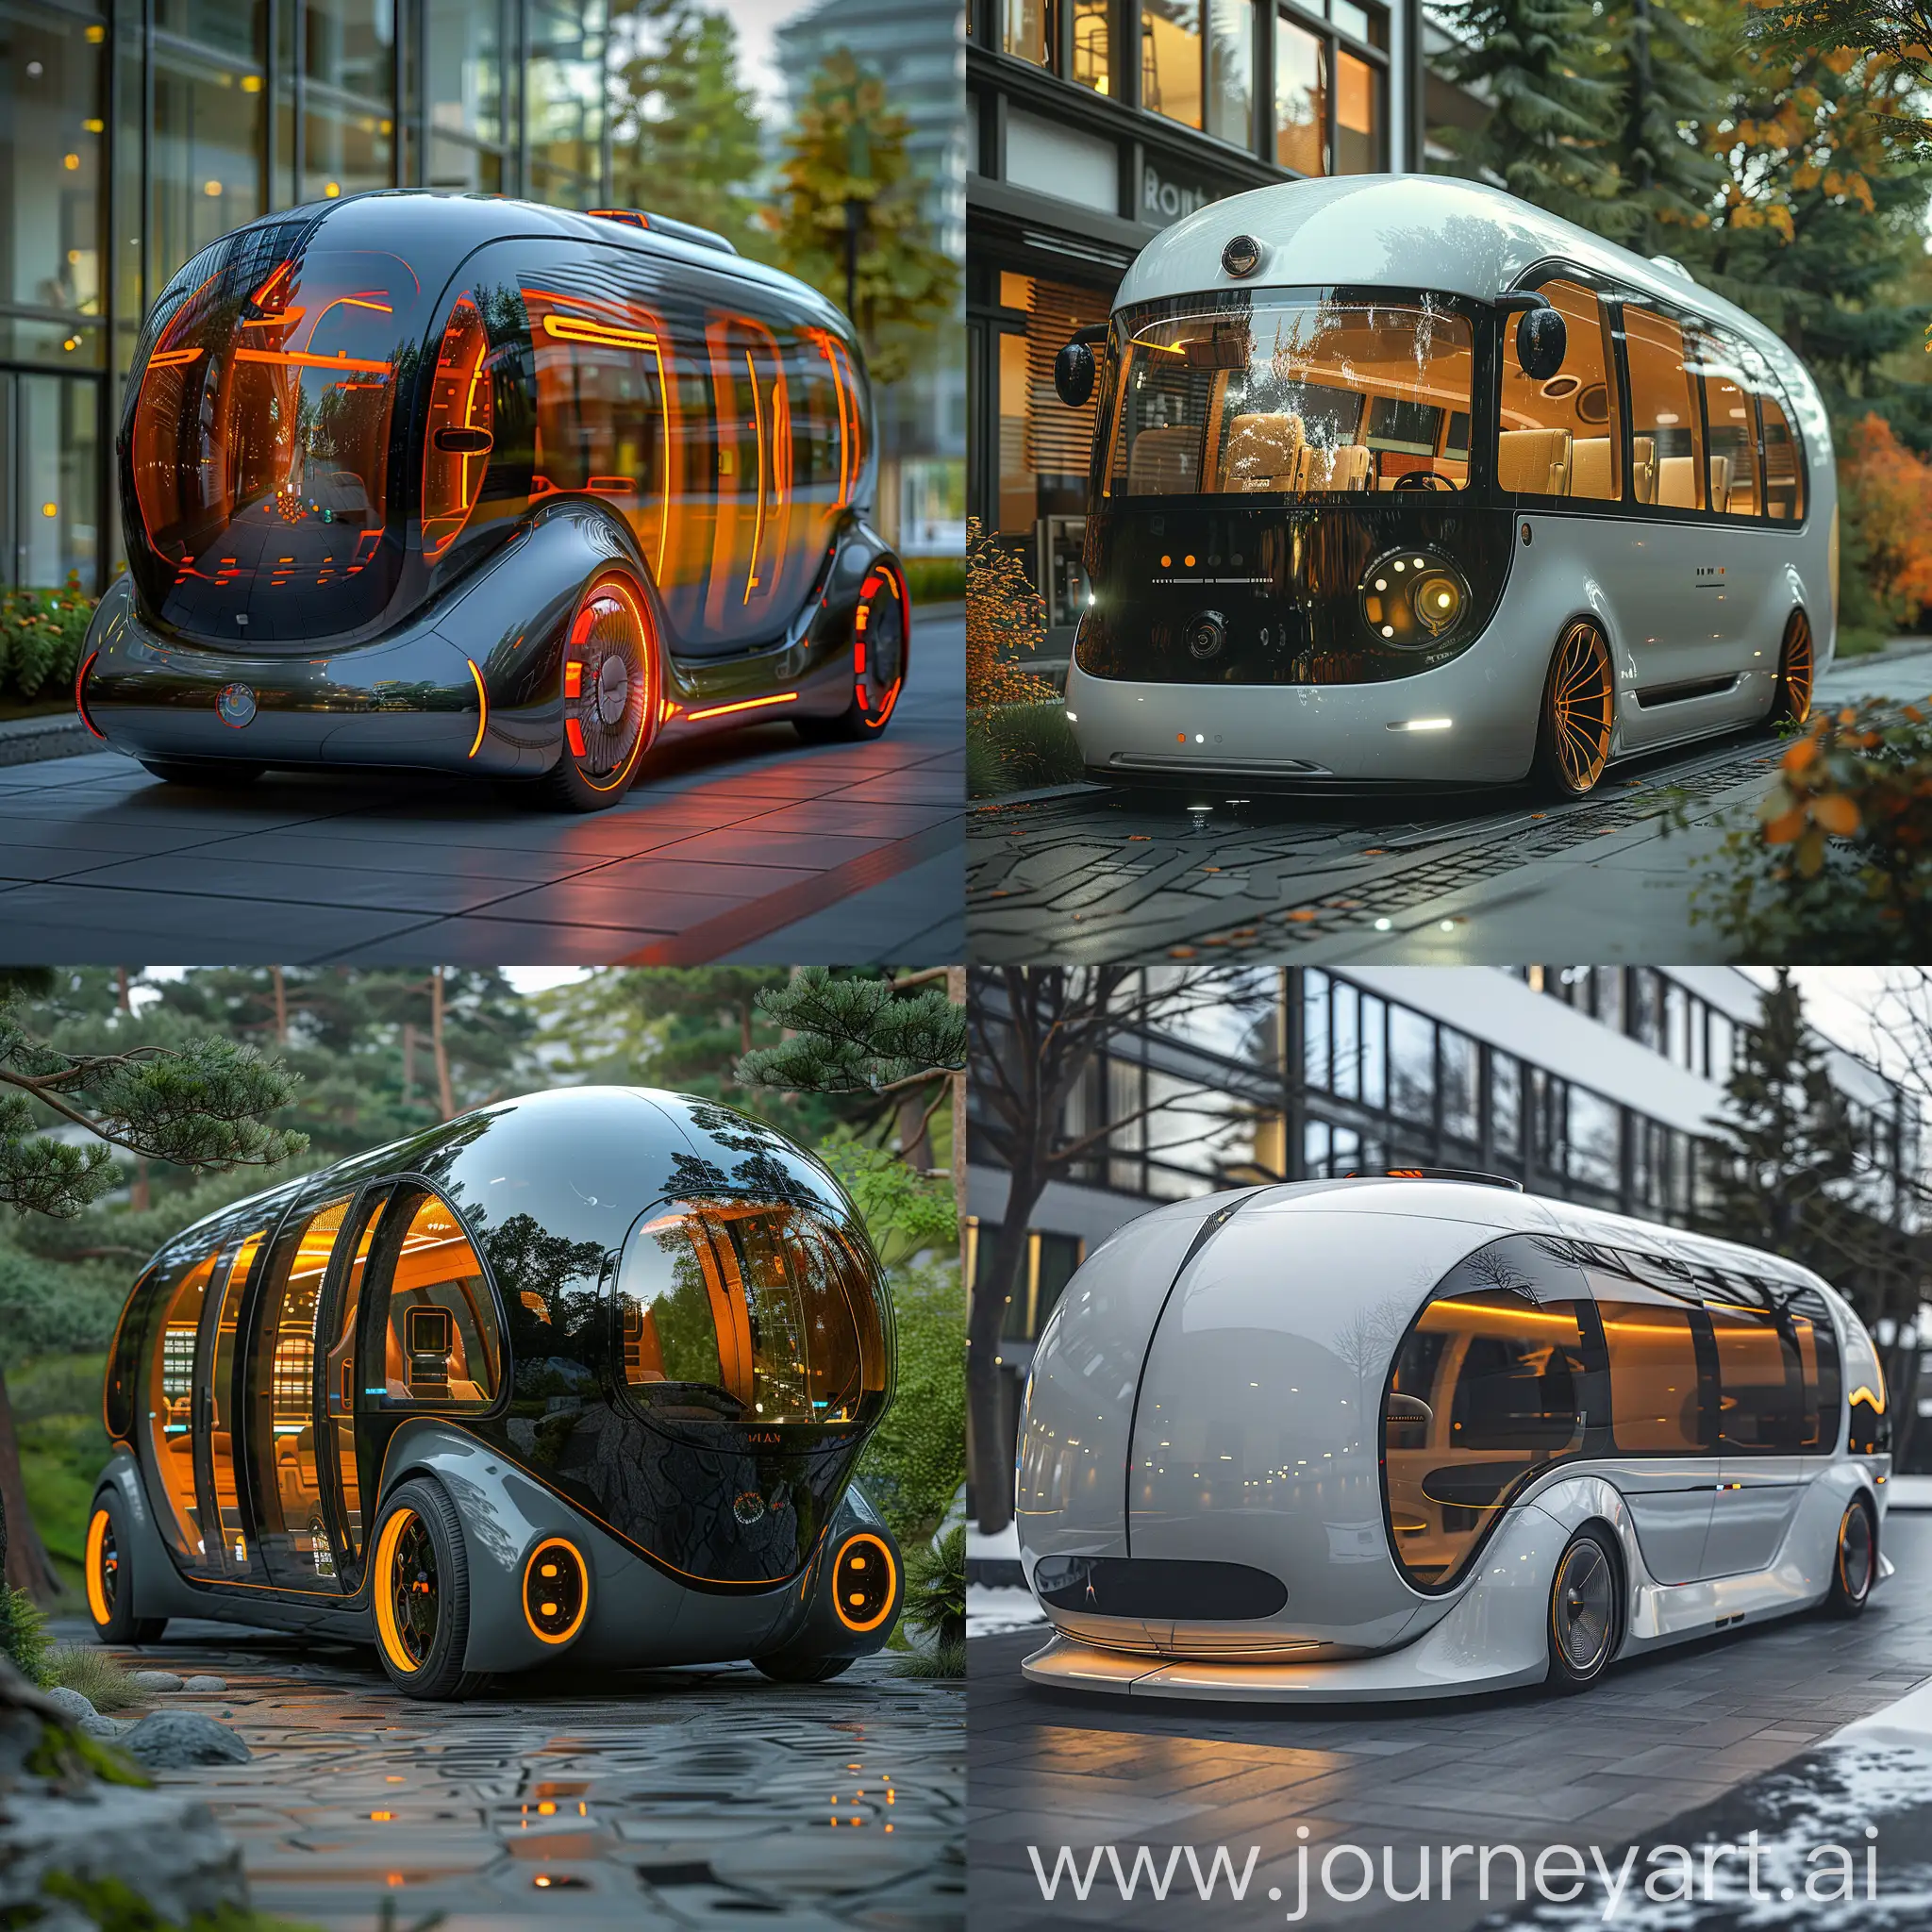 Futuristic microbus, Electric Vehicle, Solar Panels, Regenerative Braking, Energy-Efficient HVAC System, Recycled Materials, Low-Rolling Resistance Tires, Aerodynamic Design, Energy Recovery System, Biodegradable Components, Smart Energy Management, Autonomous Driving, Advanced Connectivity, Augmented Reality Windshield, Gesture Control, Voice Assistant, Biometric Sensors, Holographic Displays, Advanced Safety Systems, Wireless Charging, Emotion Recognition, Self-Healing Paint, Nanocoating for Solar Panels, Nanofiltration System, Nanocomposite Materials, Nanoparticle-Based Lubricants, Nanoparticle-Enhanced Insulation, Nanoparticle-Based Sensors, Nanoparticle-Infused Glass, Nanoscale Energy Storage, Nanorobotics for Maintenance, octane render --stylize 1000